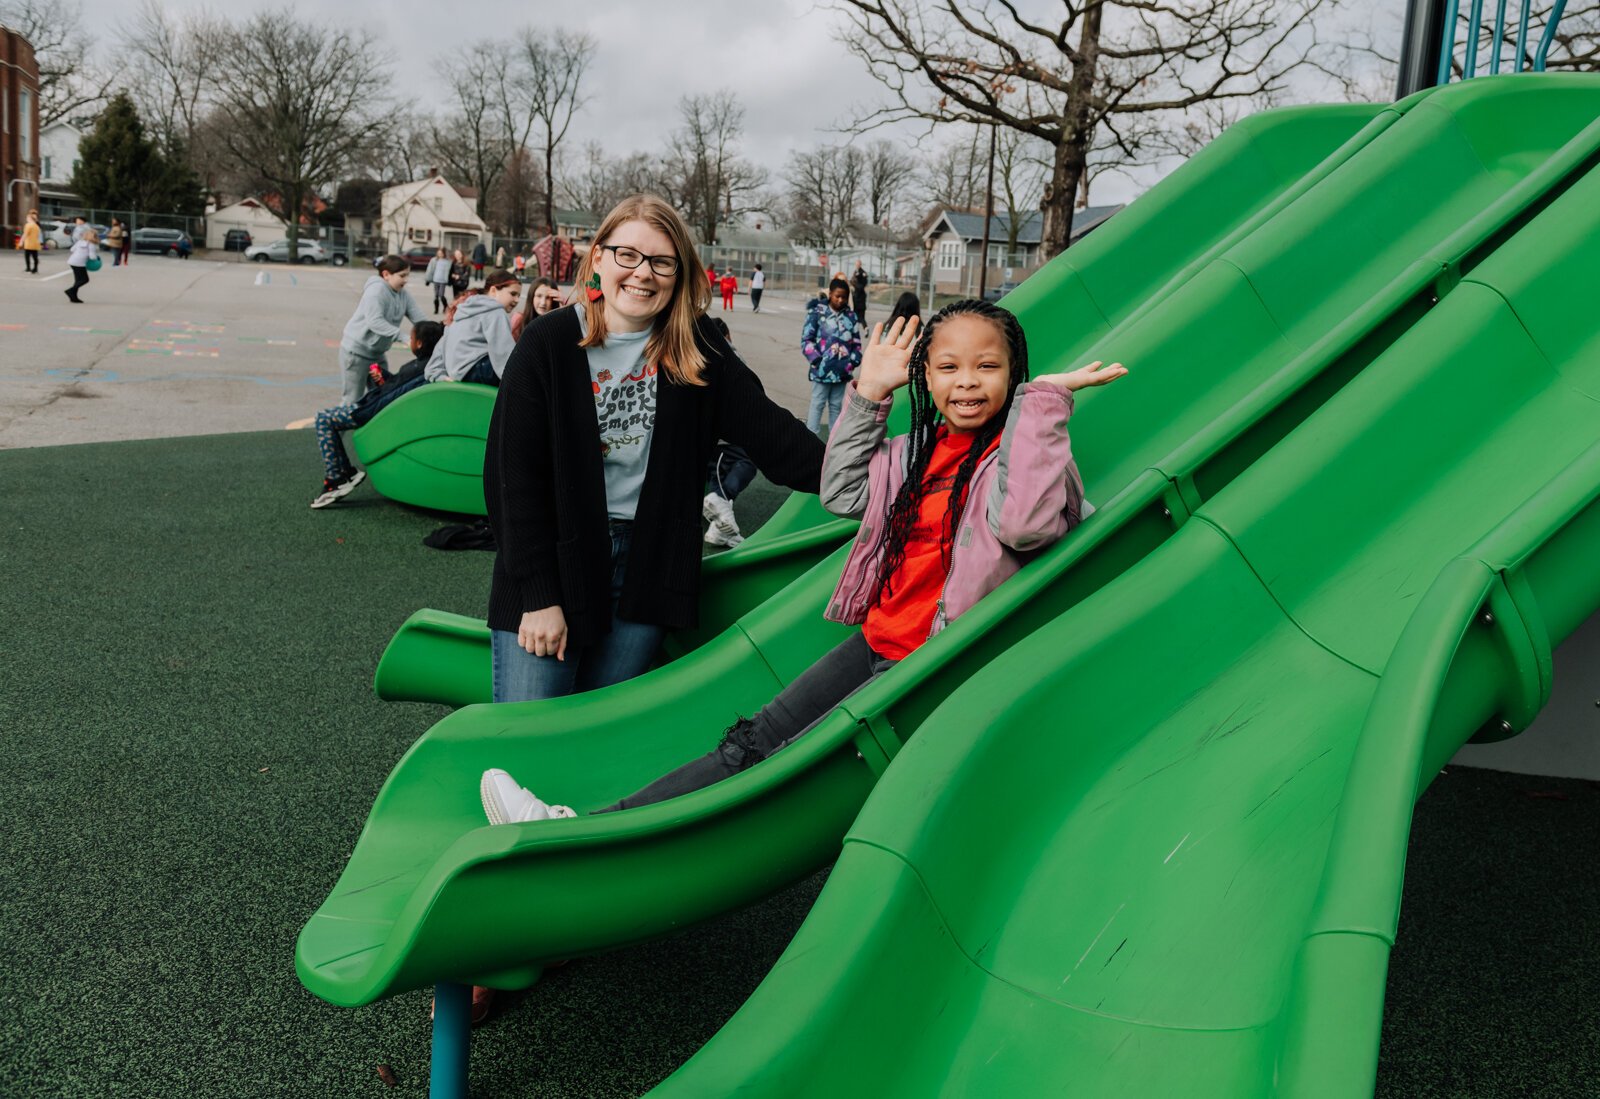 Kamyra Smith slides on the playground as Leitia McHugh looks on during the fourth grade recess at Forest Park Elementary School.